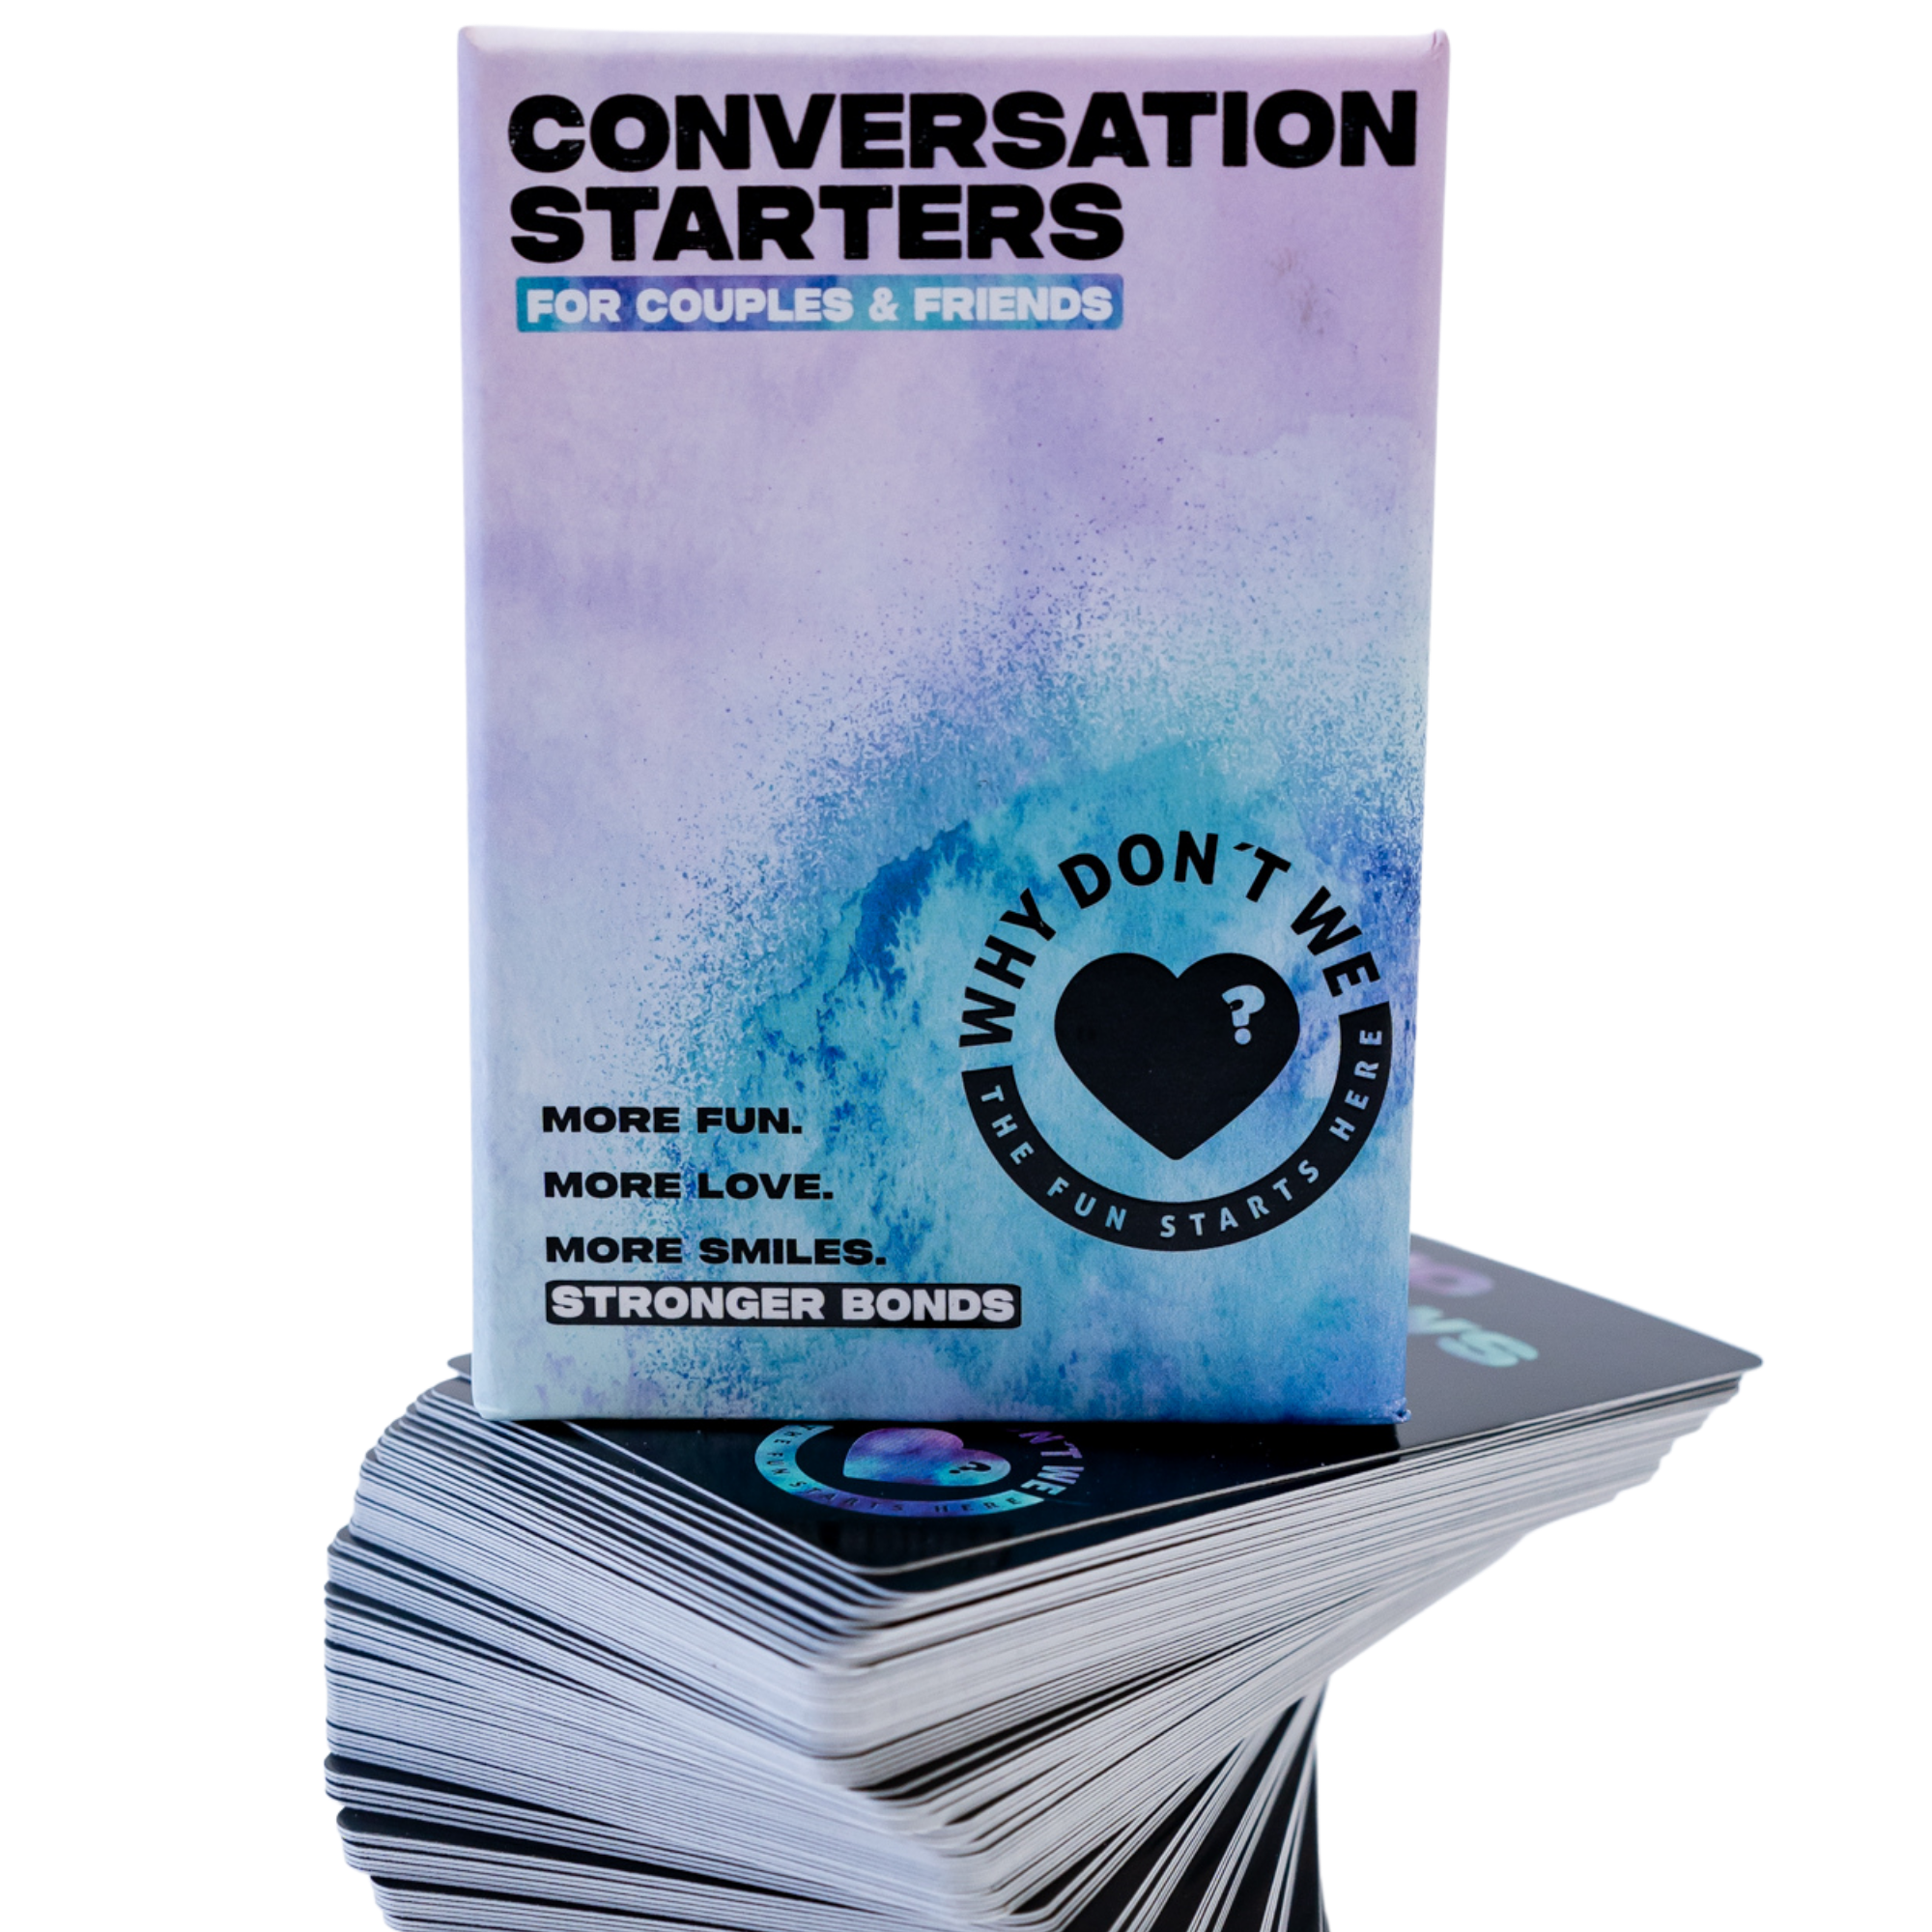 Conversation Starters for Couples and Friend Groups by Why Don't We. 120 Game Cards - image 1 of 8